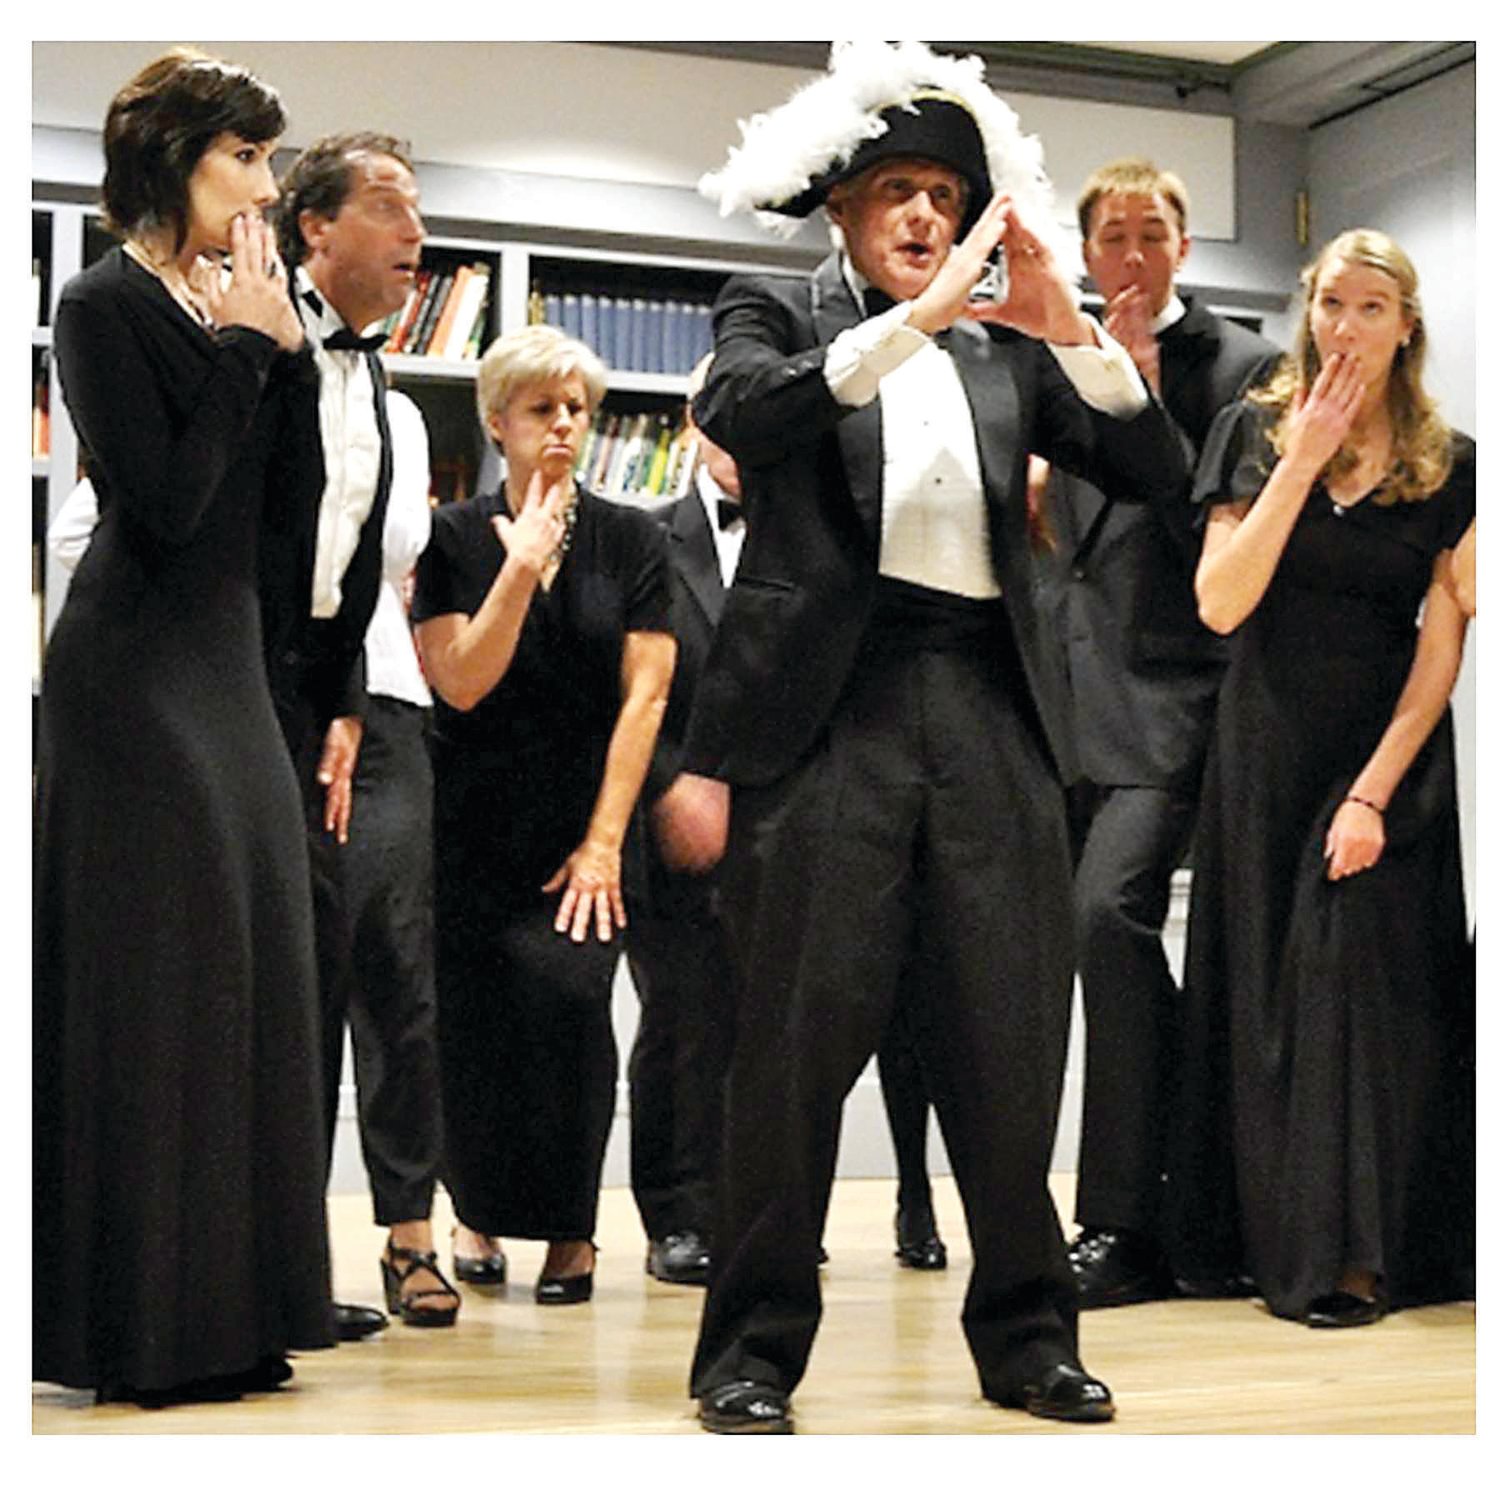 Members of the Bucks County Gilbert and Sullivan Society will perform music from Broadway and Gilbert & Sullivan and serve desserts in their Autumn Cabaret.